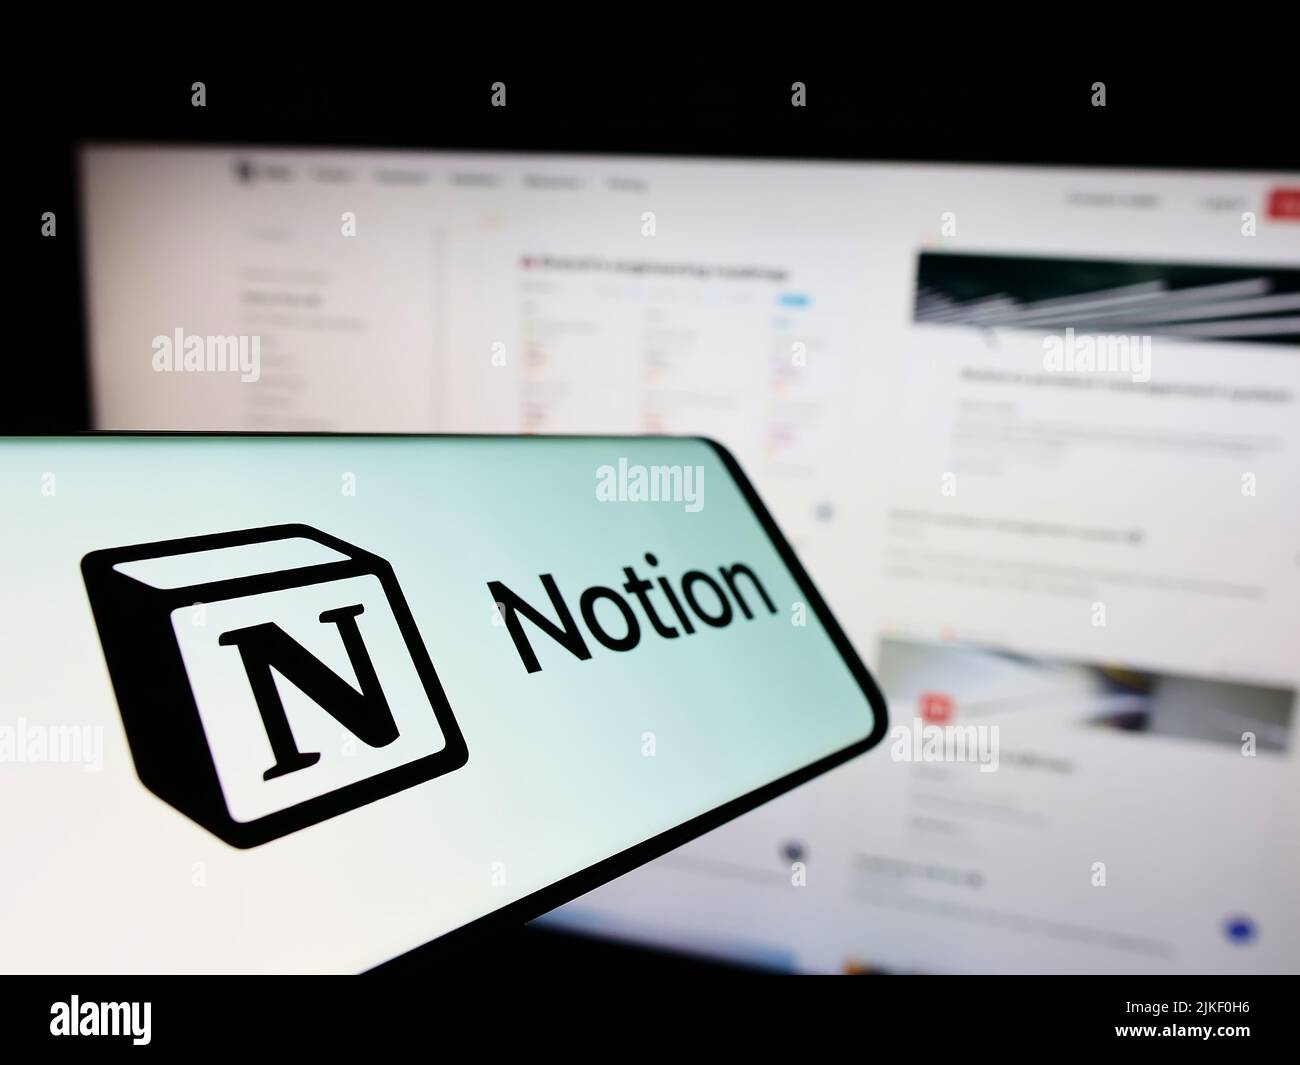 Smartphone with logo of American software company Notion Labs Inc. on screen in front of business website. Focus on center-left of phone display. Stock Photo